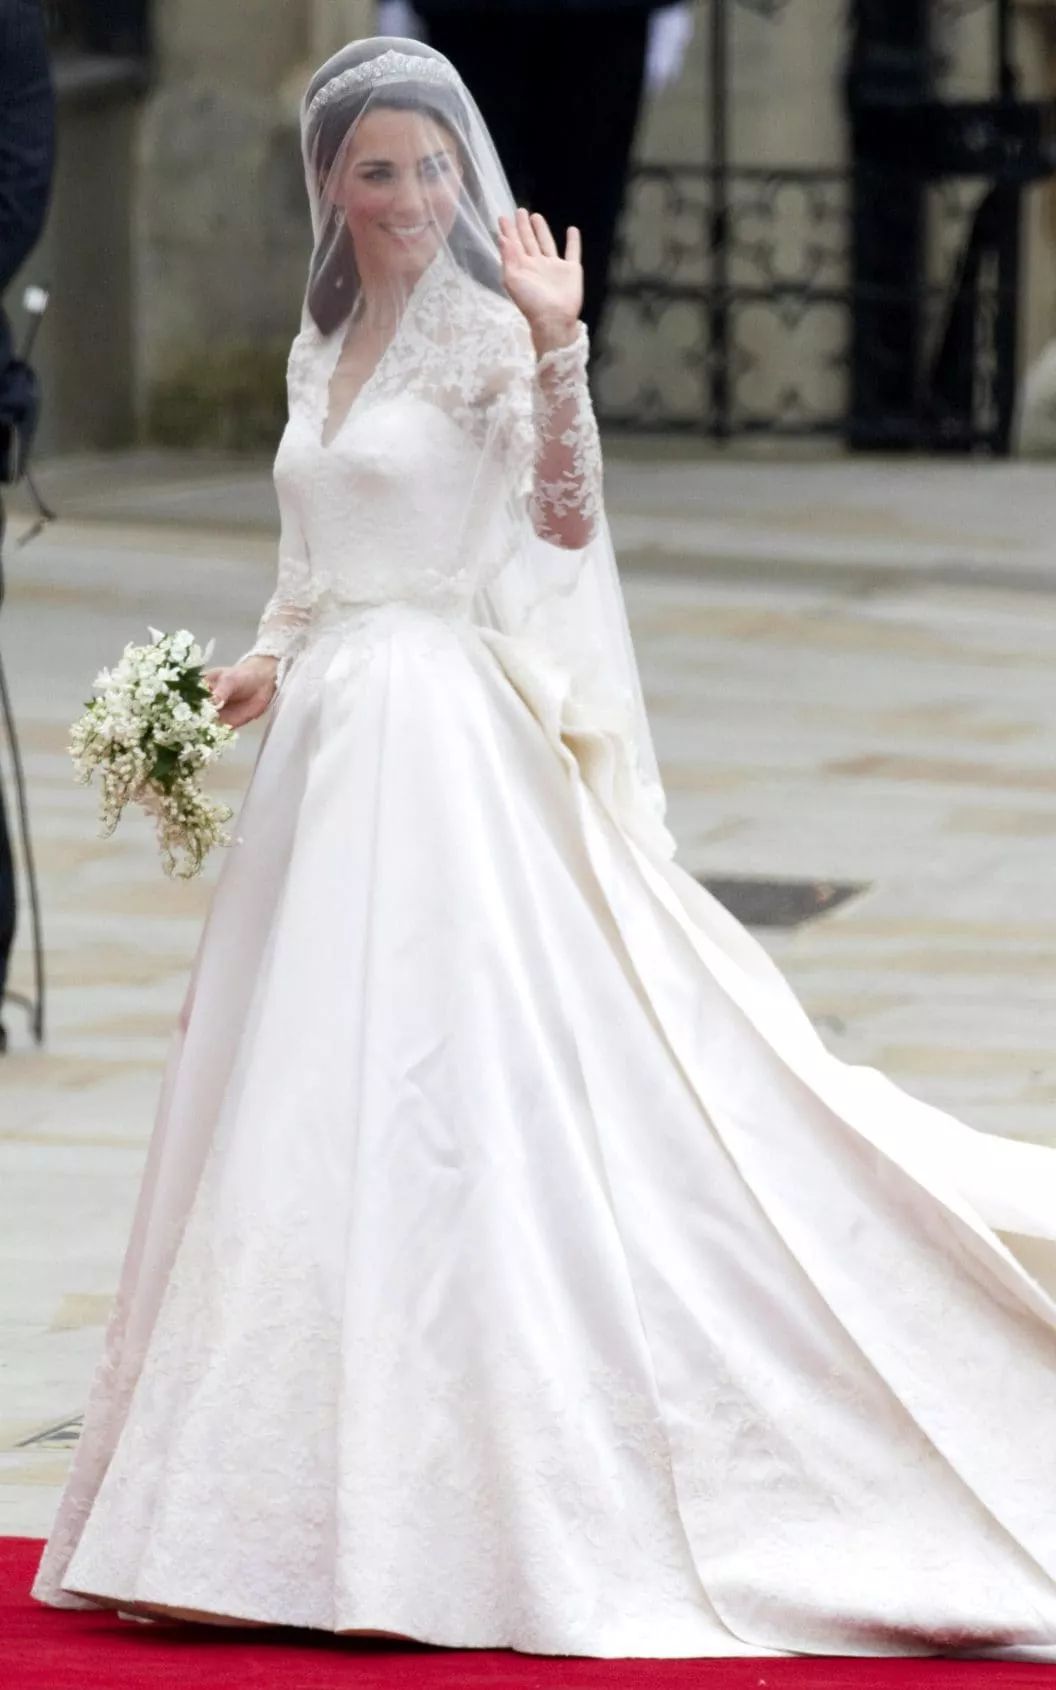 Meghan Markle's wedding dress: The pictures, the designer & the special details | HELLO!